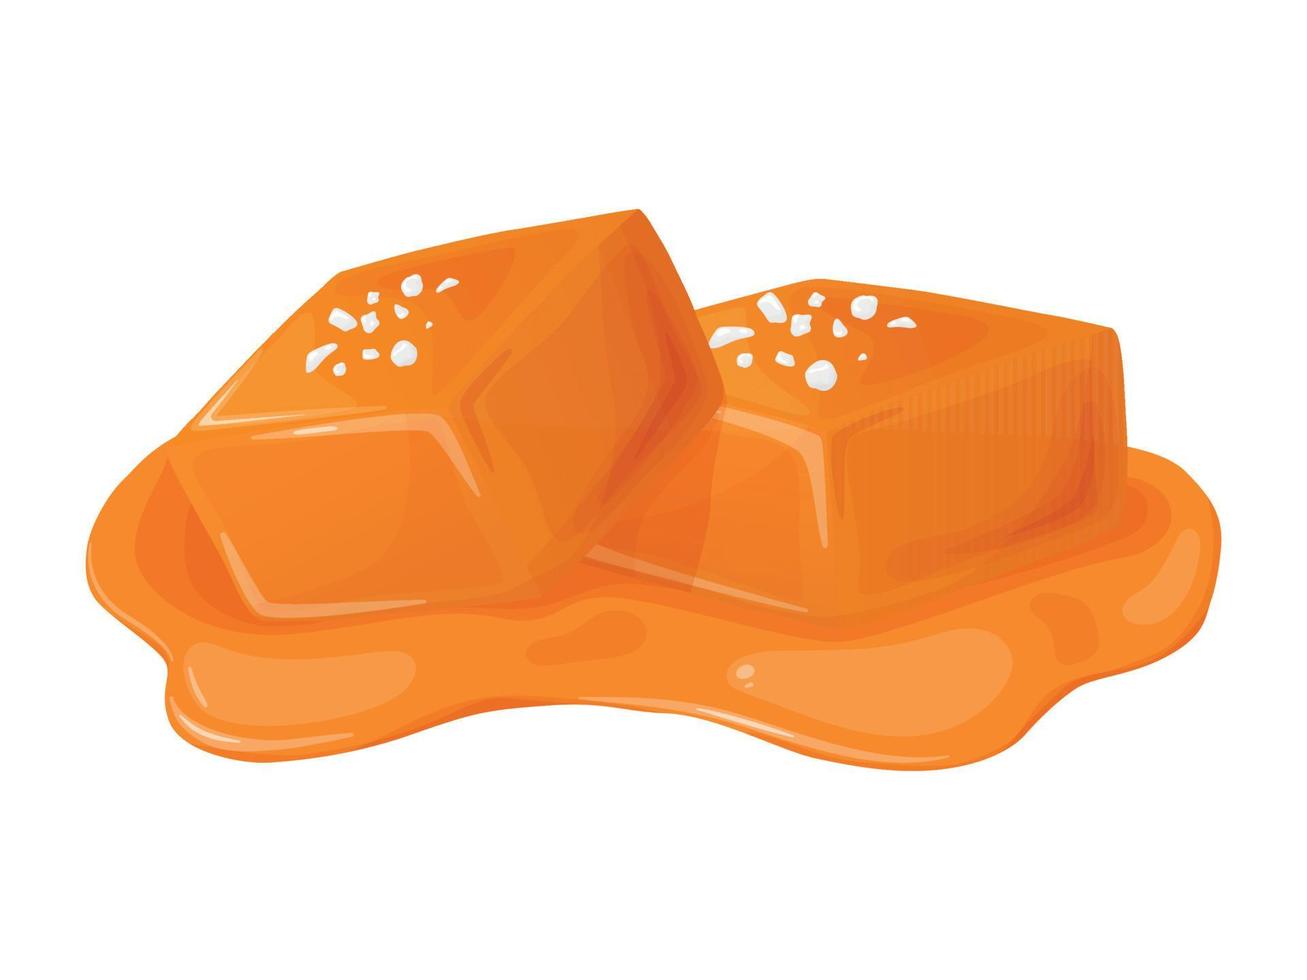 Candy salted caramel. Melted appetizing caramel cubes. vector